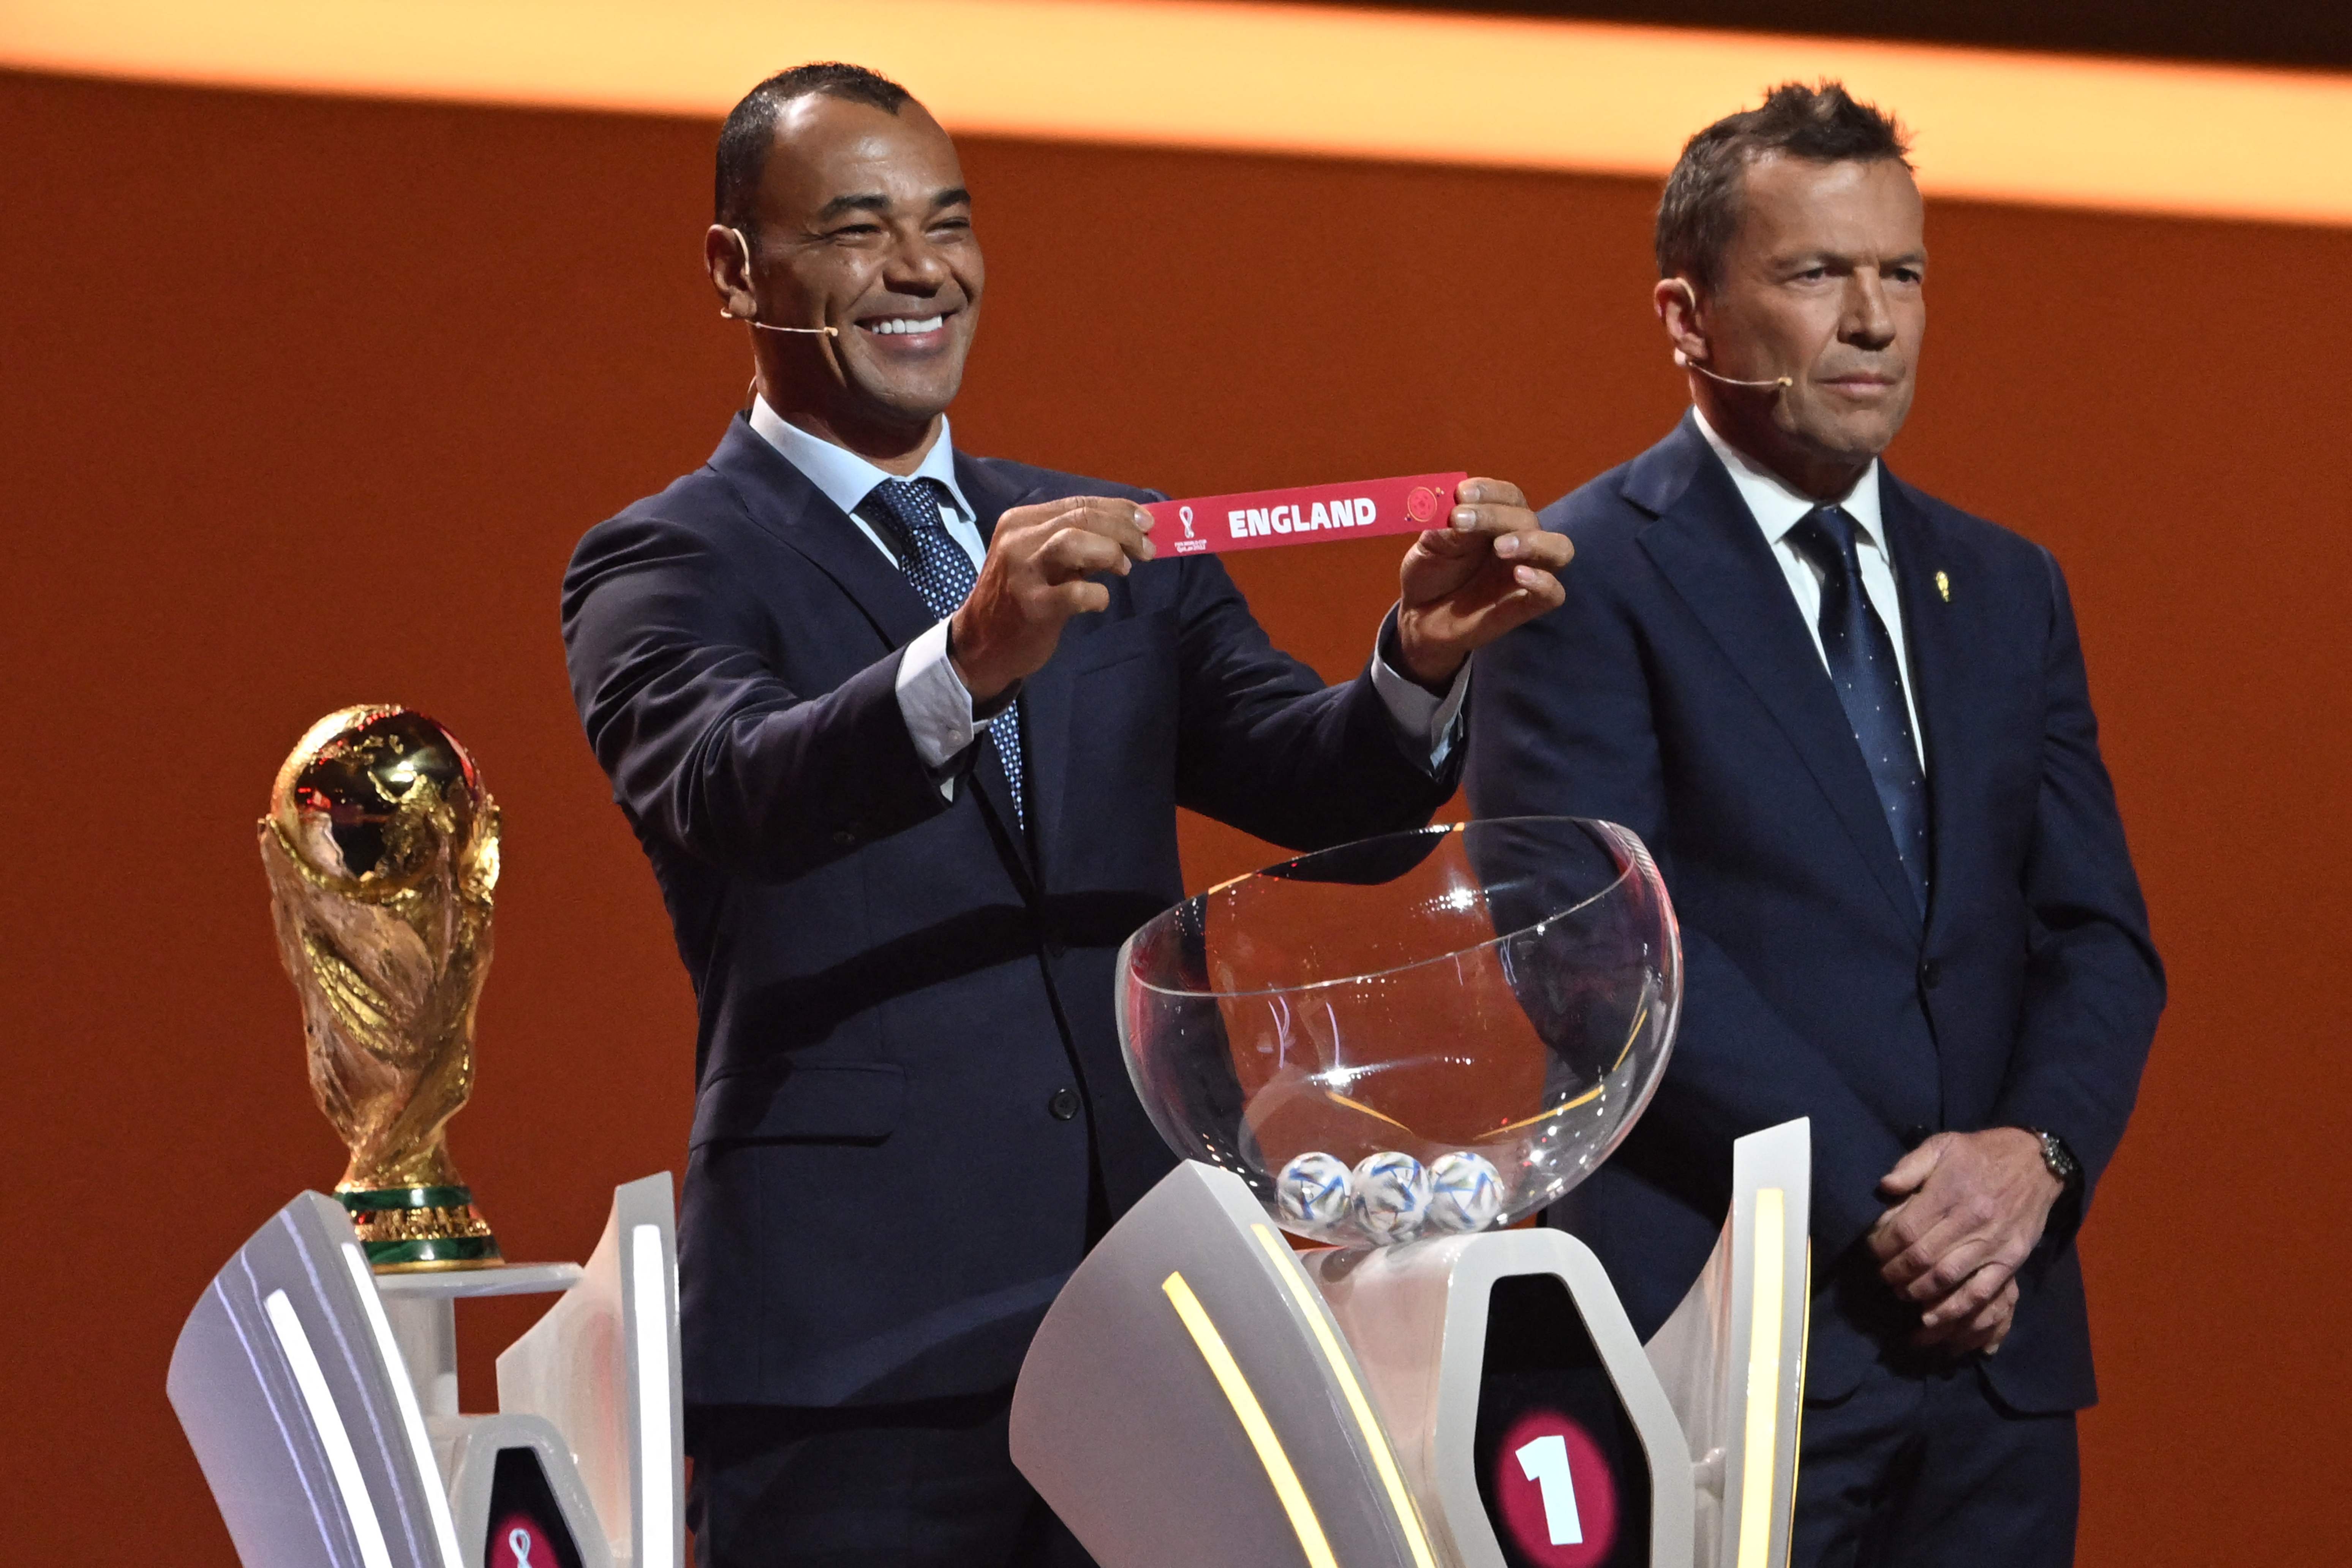 World Cup 2022 qualifying draw LIVE: England in group with Poland, Wales to  face Belgium - latest updates and reaction | The Sun